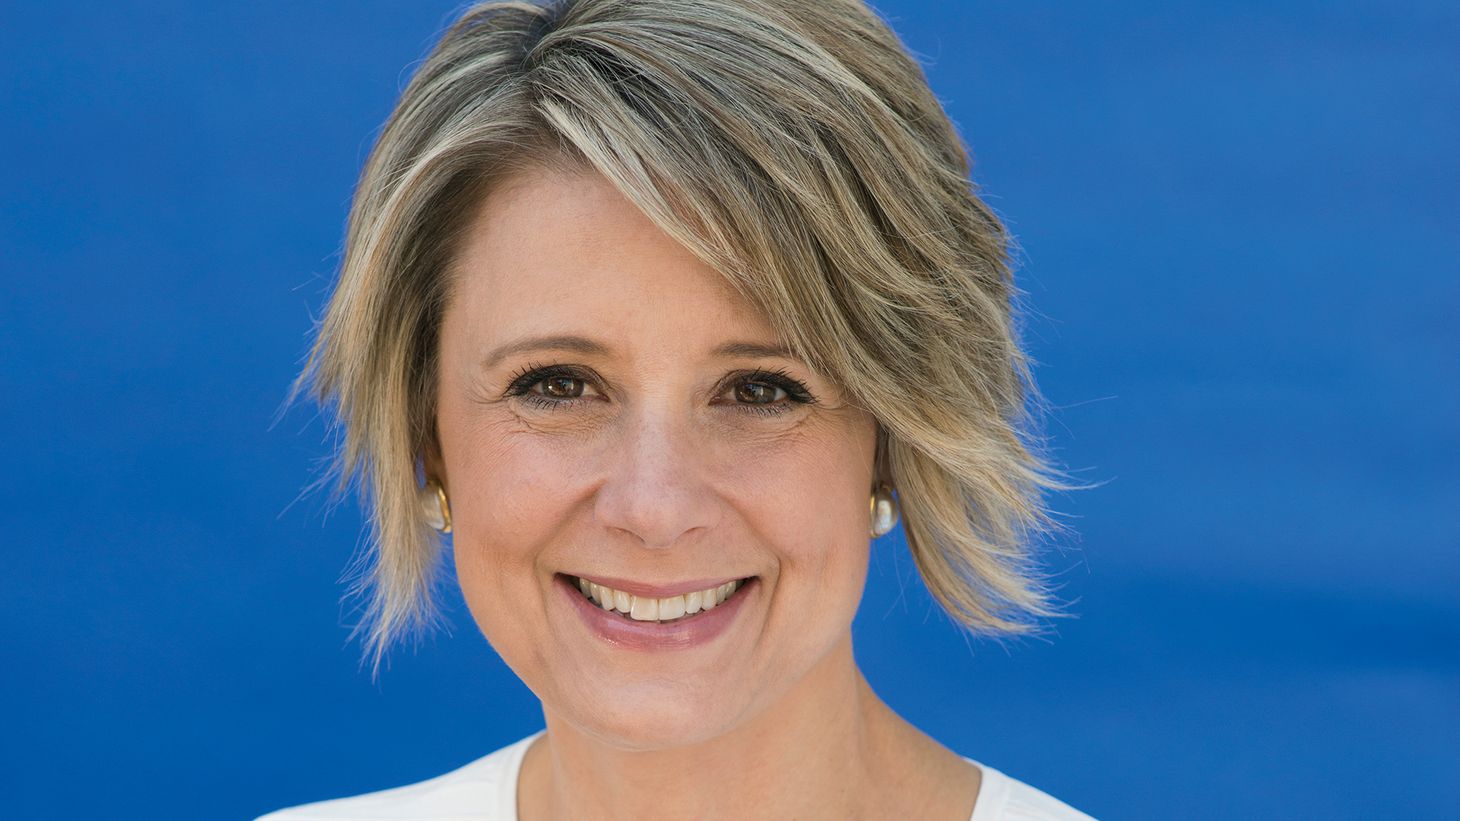 Kristina Keneally: Finding strength in death